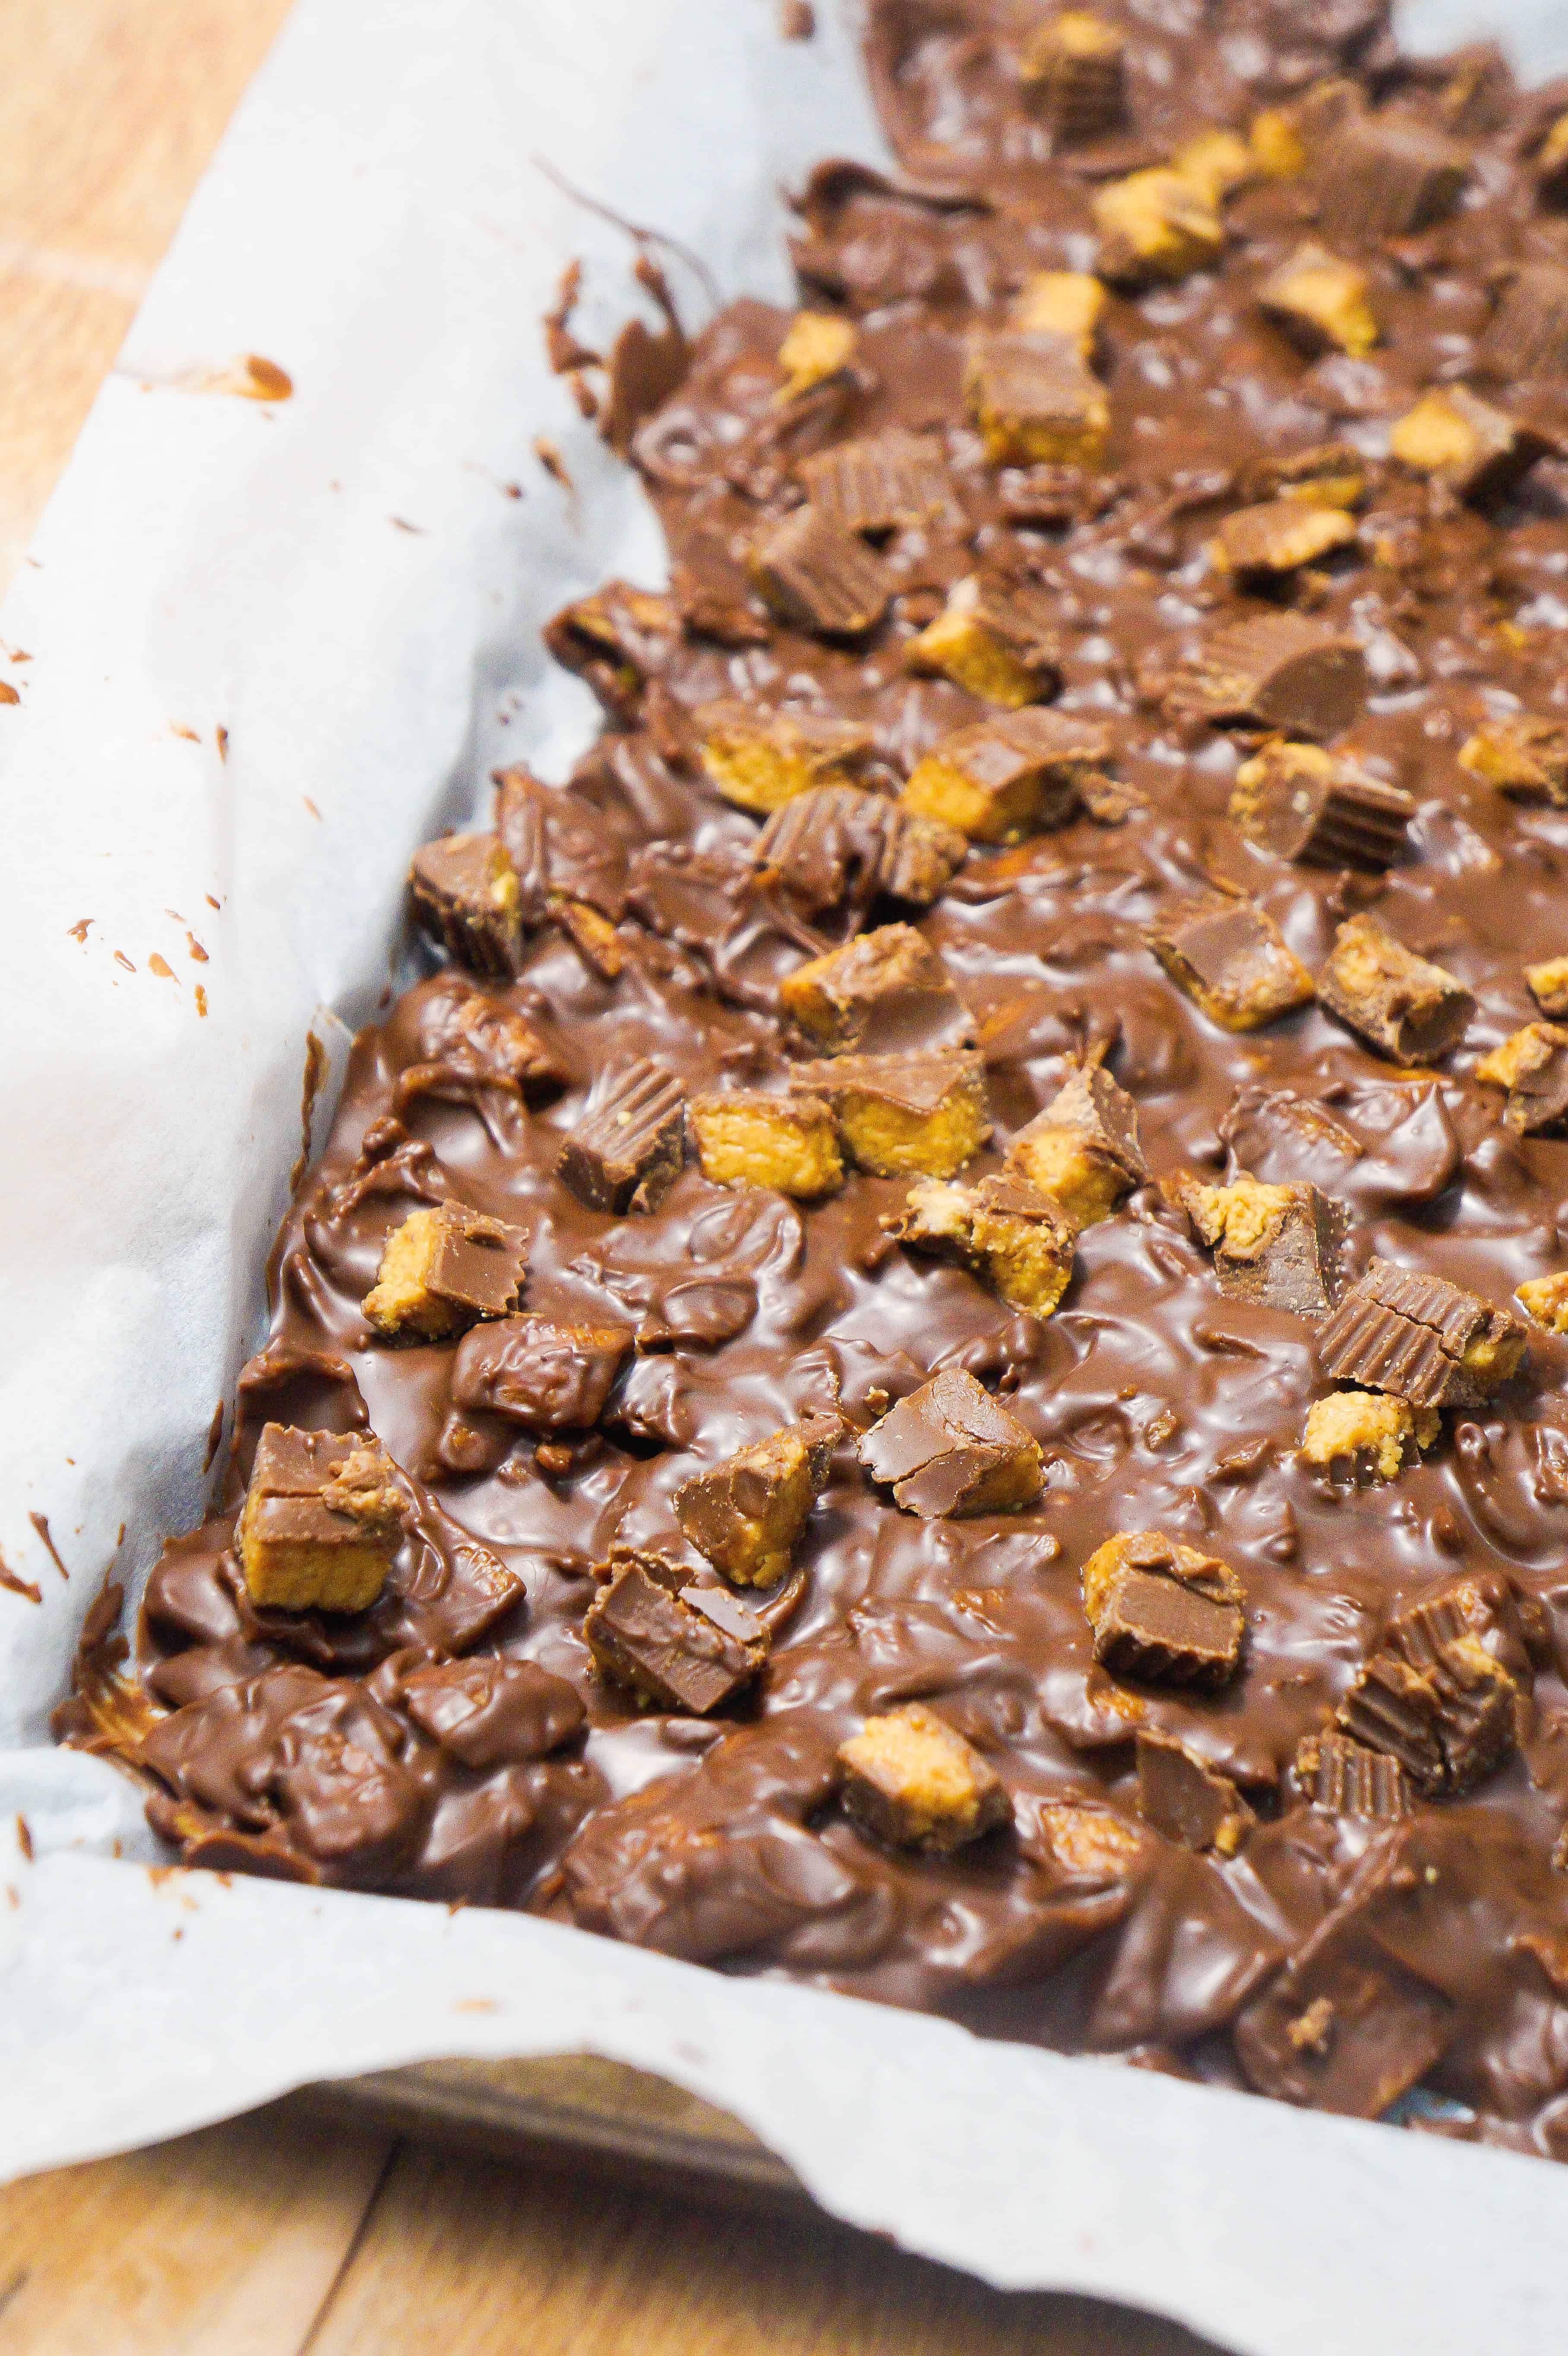 Peanut Butter Chocolate Bark loaded with Fritos corn chips is an easy dessert recipe.